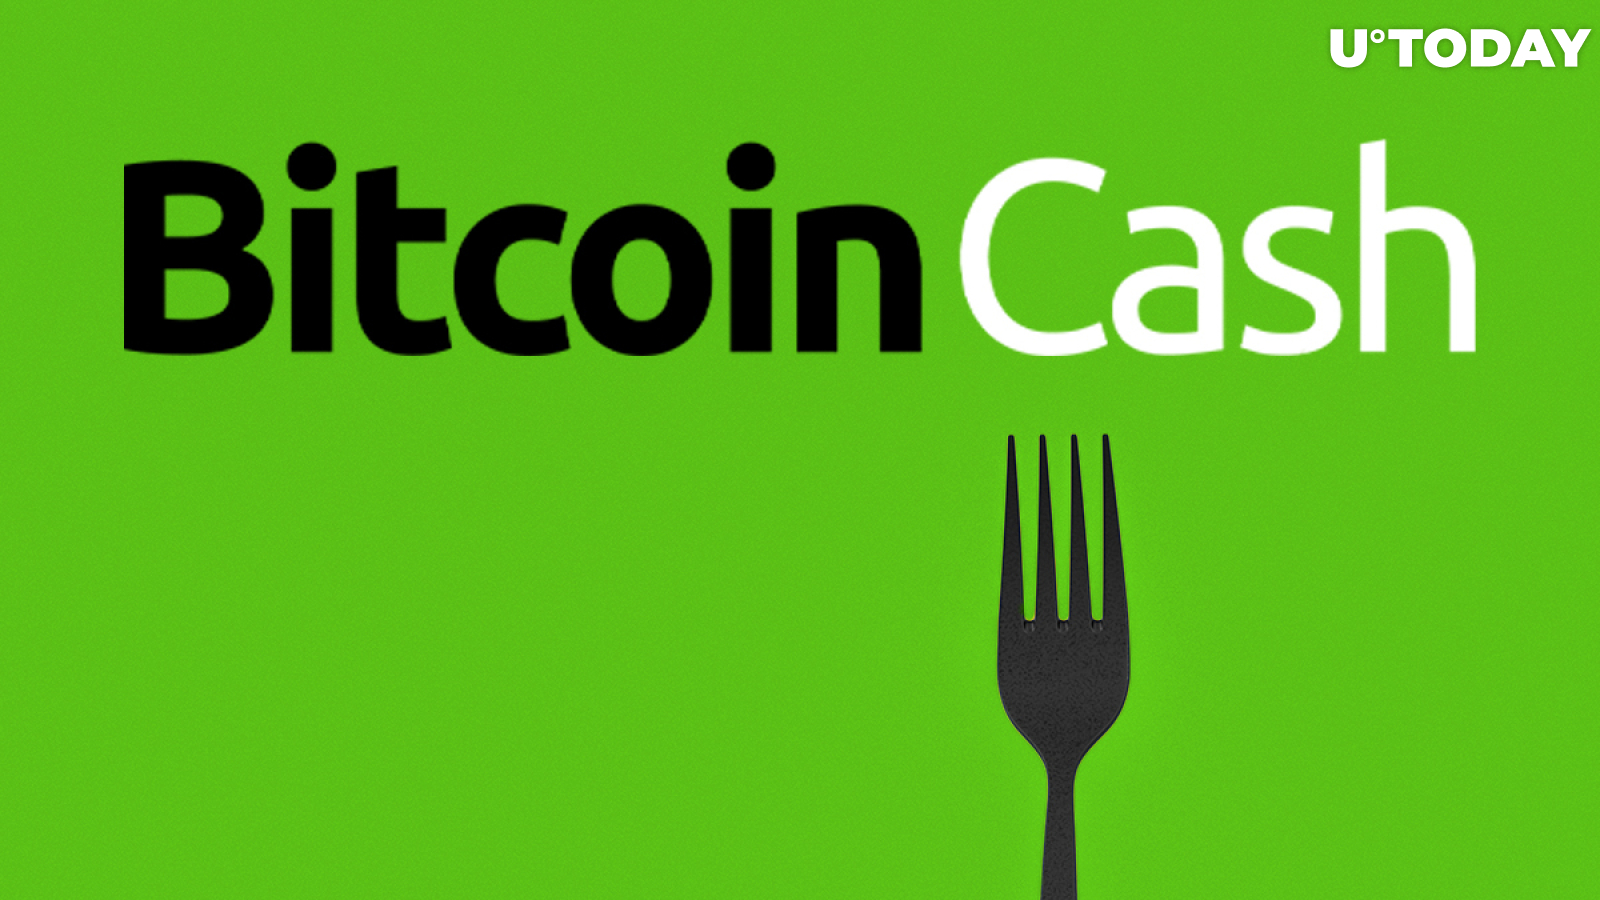 Bitcoin Cash Hard Fork to Gain Support from OKEx, BCH Holders Will Receive New Tokens 1:1